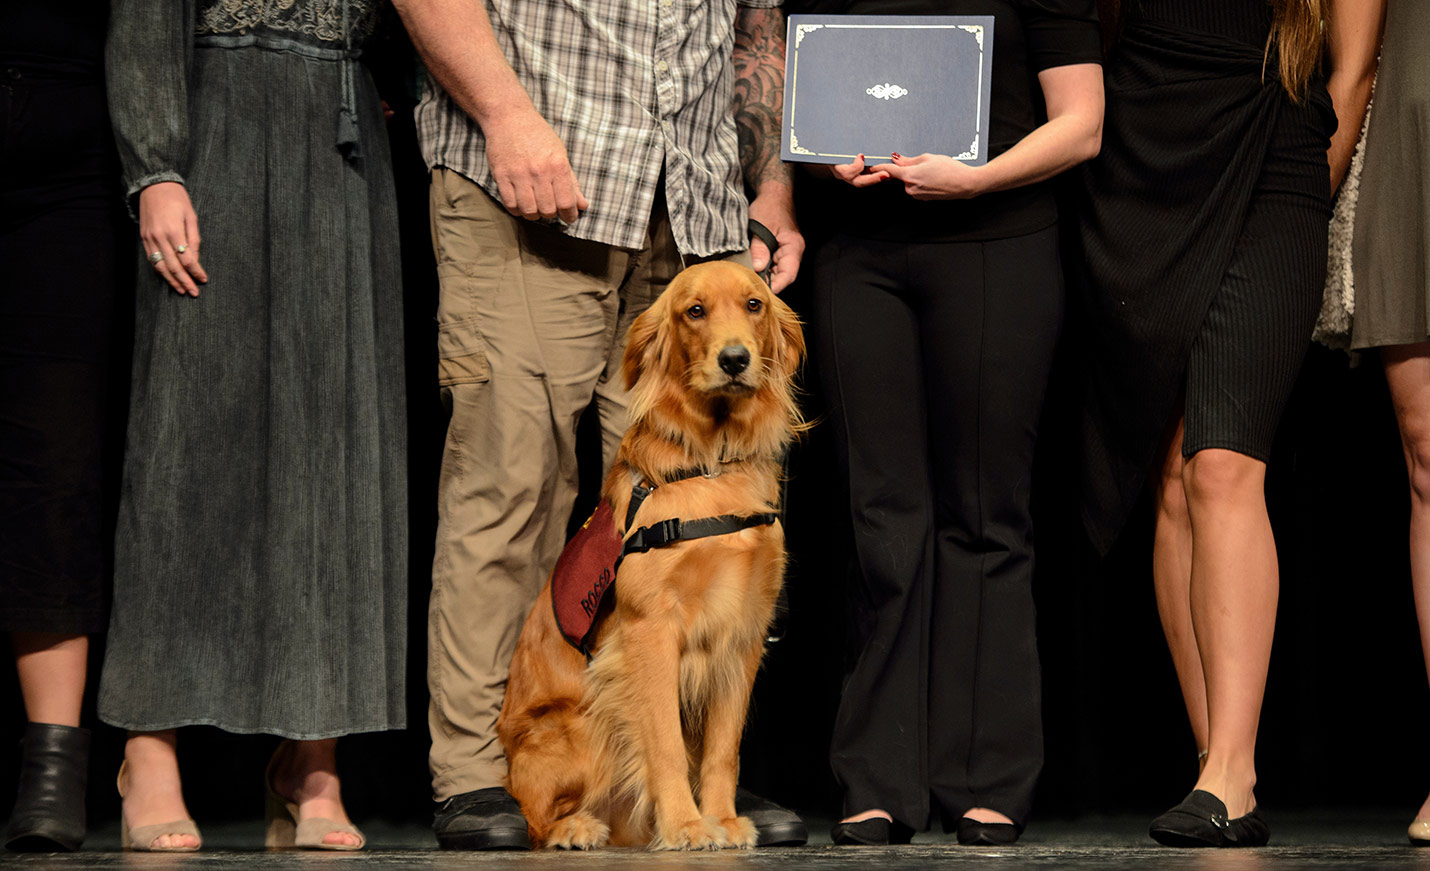 A service dog sits with four people standing behind holding the dogs graduation certificate.